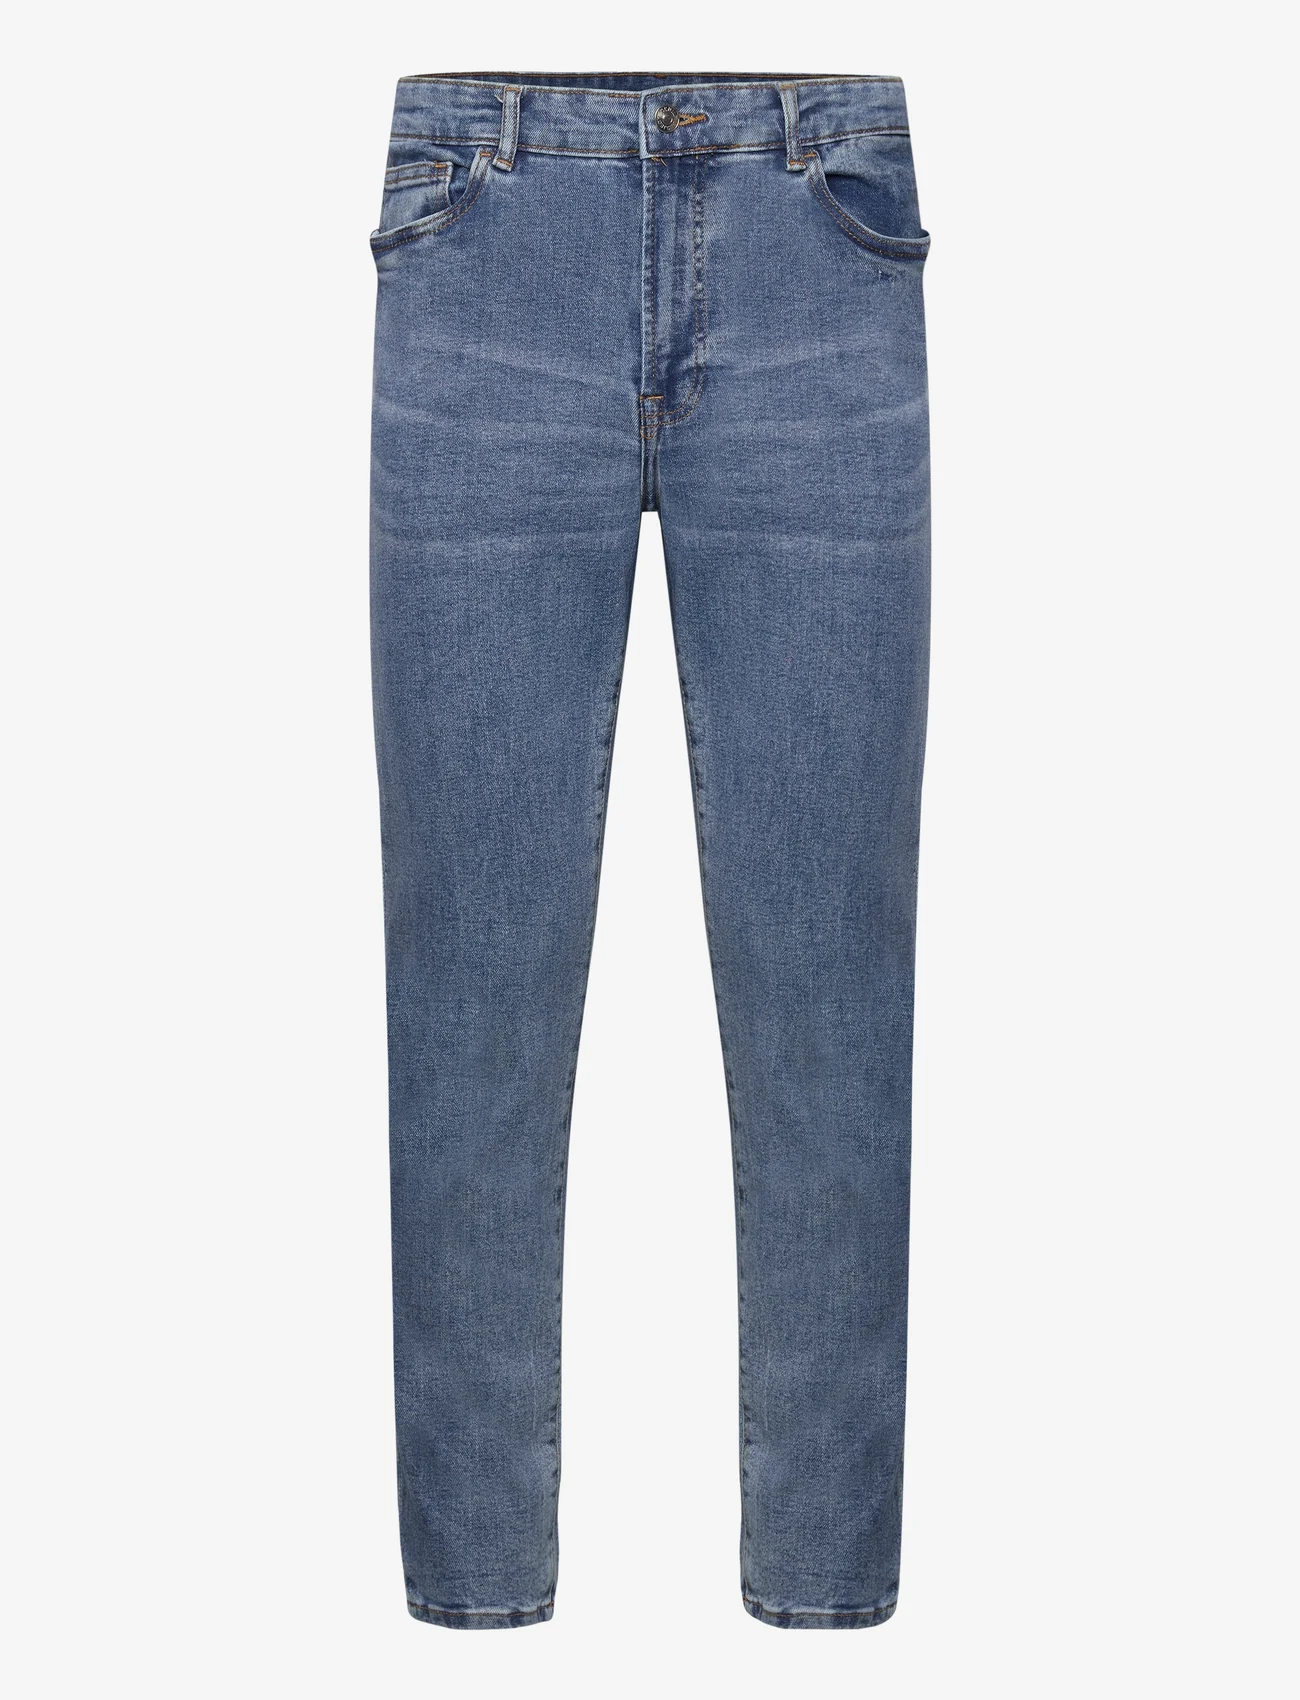 Denim project - DPRecycled Loose Jeans - loose jeans - medium stone wash - 0